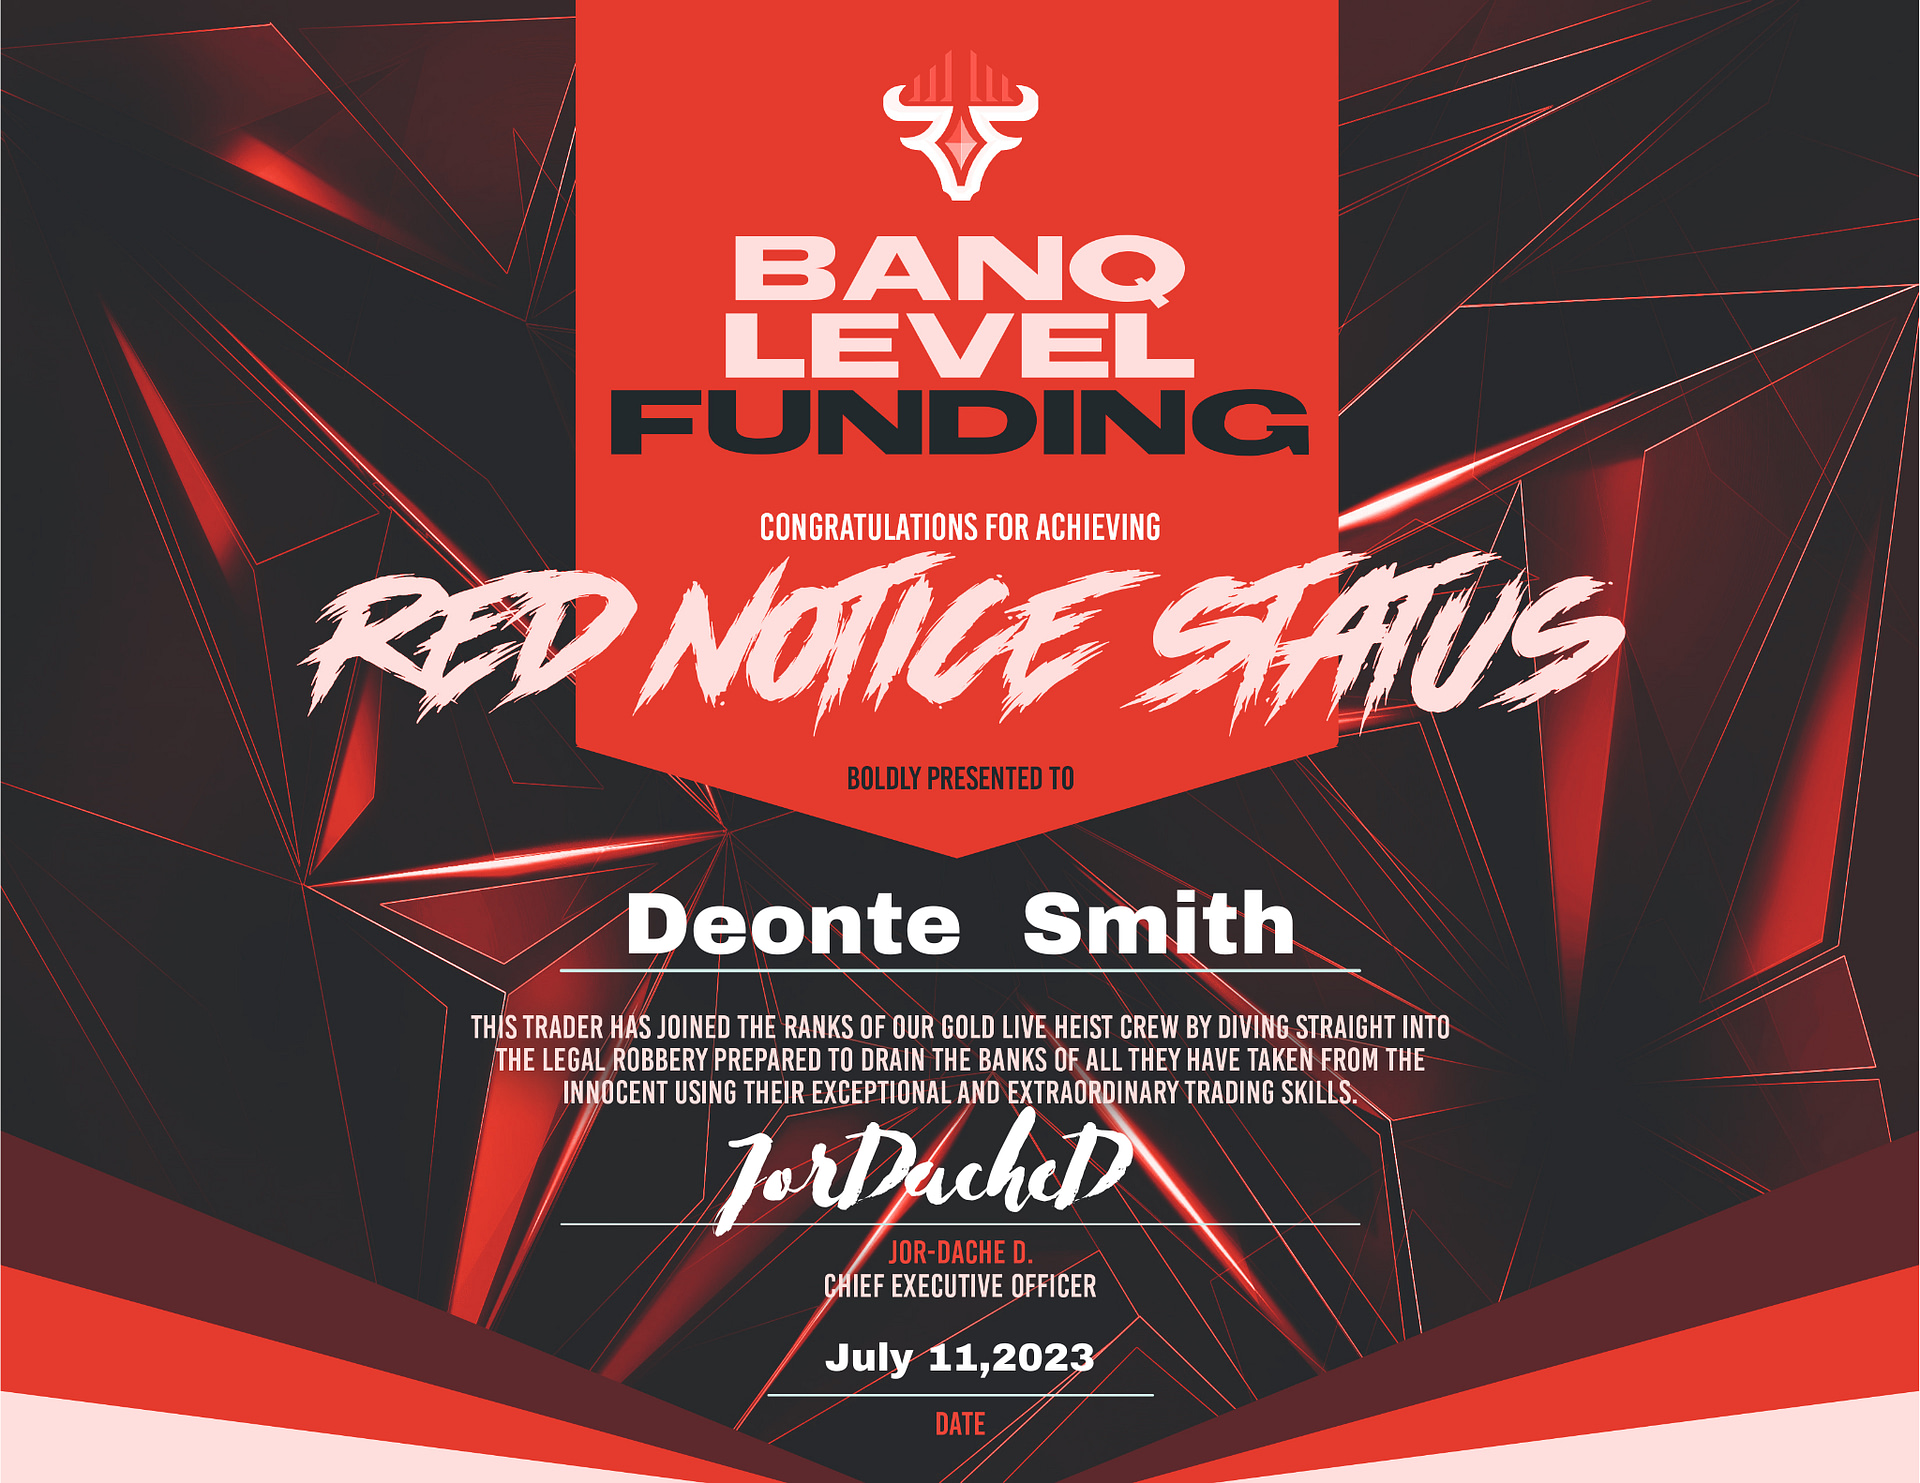 Red Notice Certification - Deonte Smith